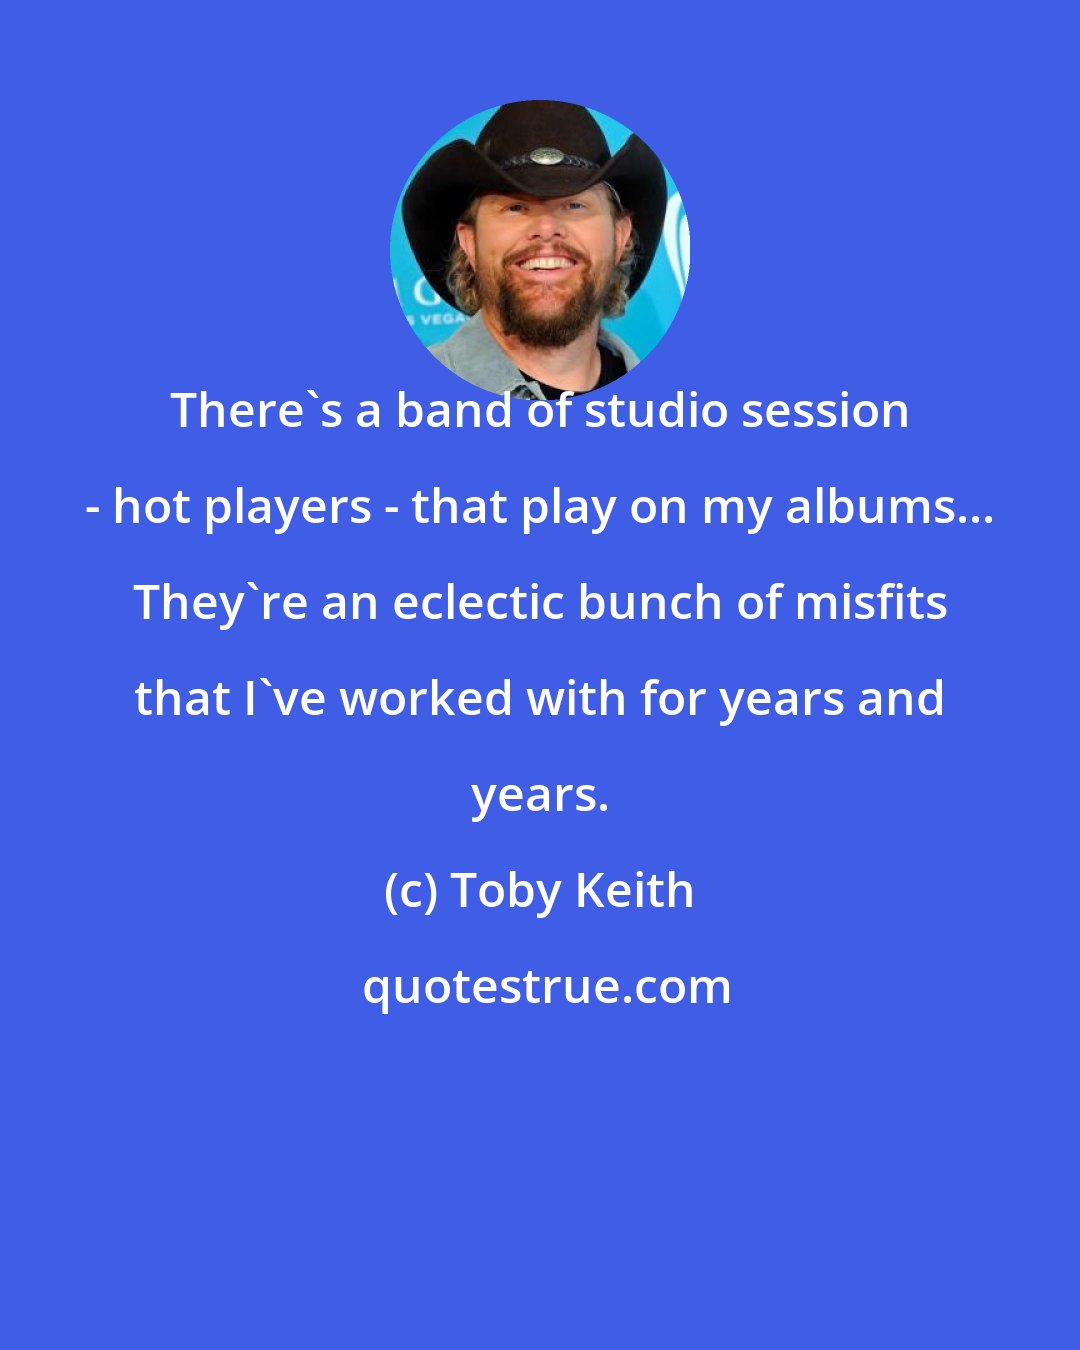 Toby Keith: There's a band of studio session - hot players - that play on my albums... They're an eclectic bunch of misfits that I've worked with for years and years.